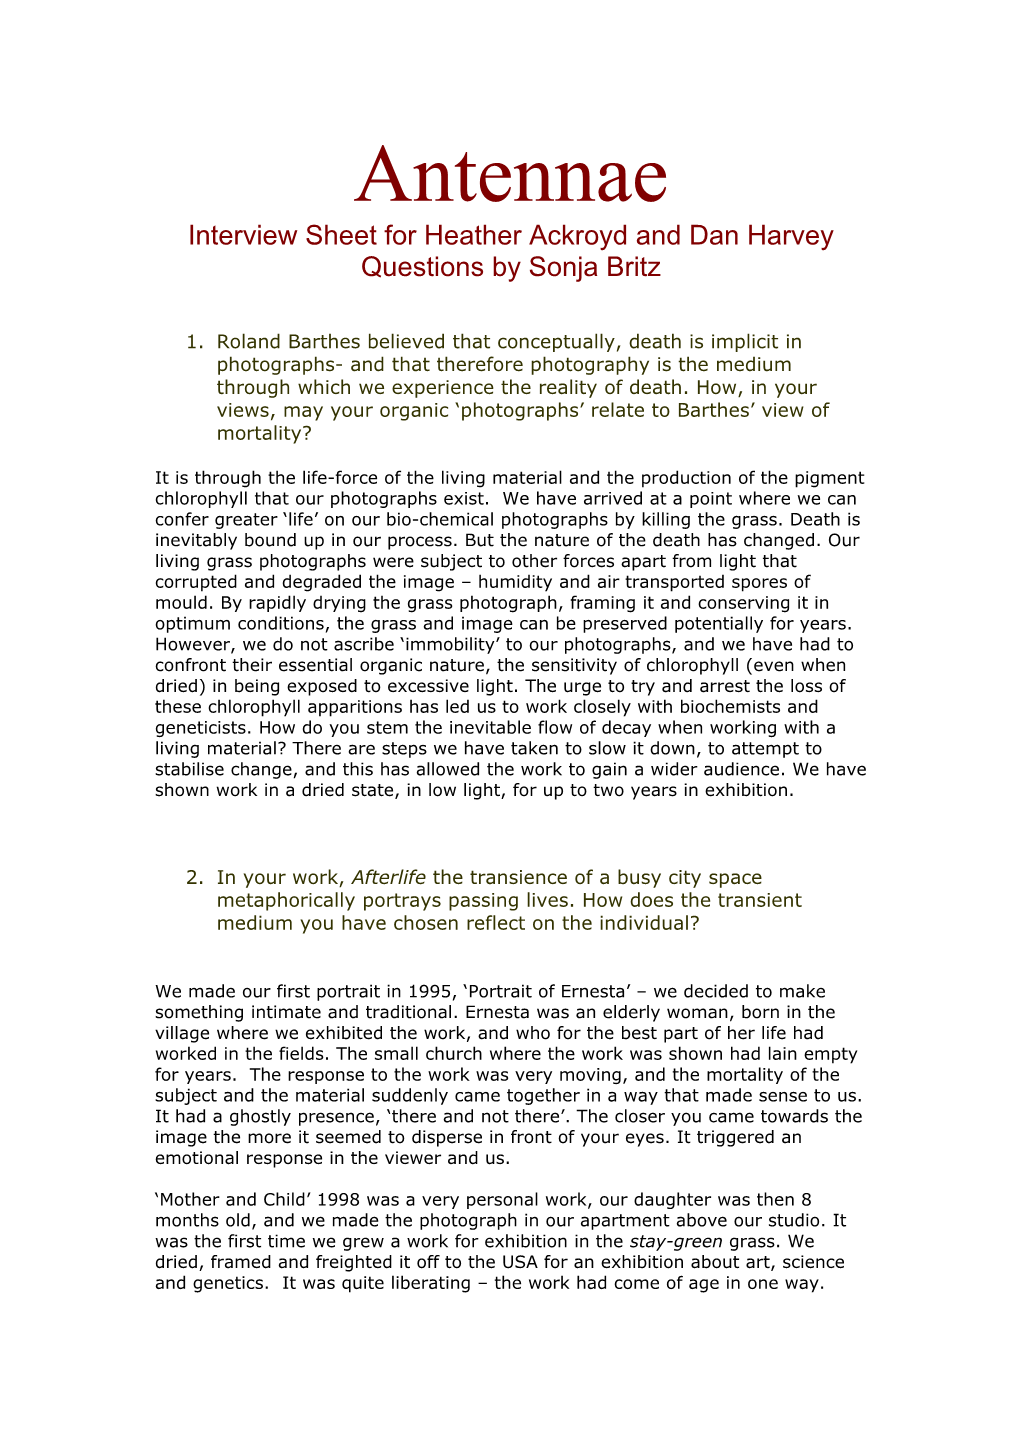 Interview Sheet for Heather Ackroyd and Dan Harvey